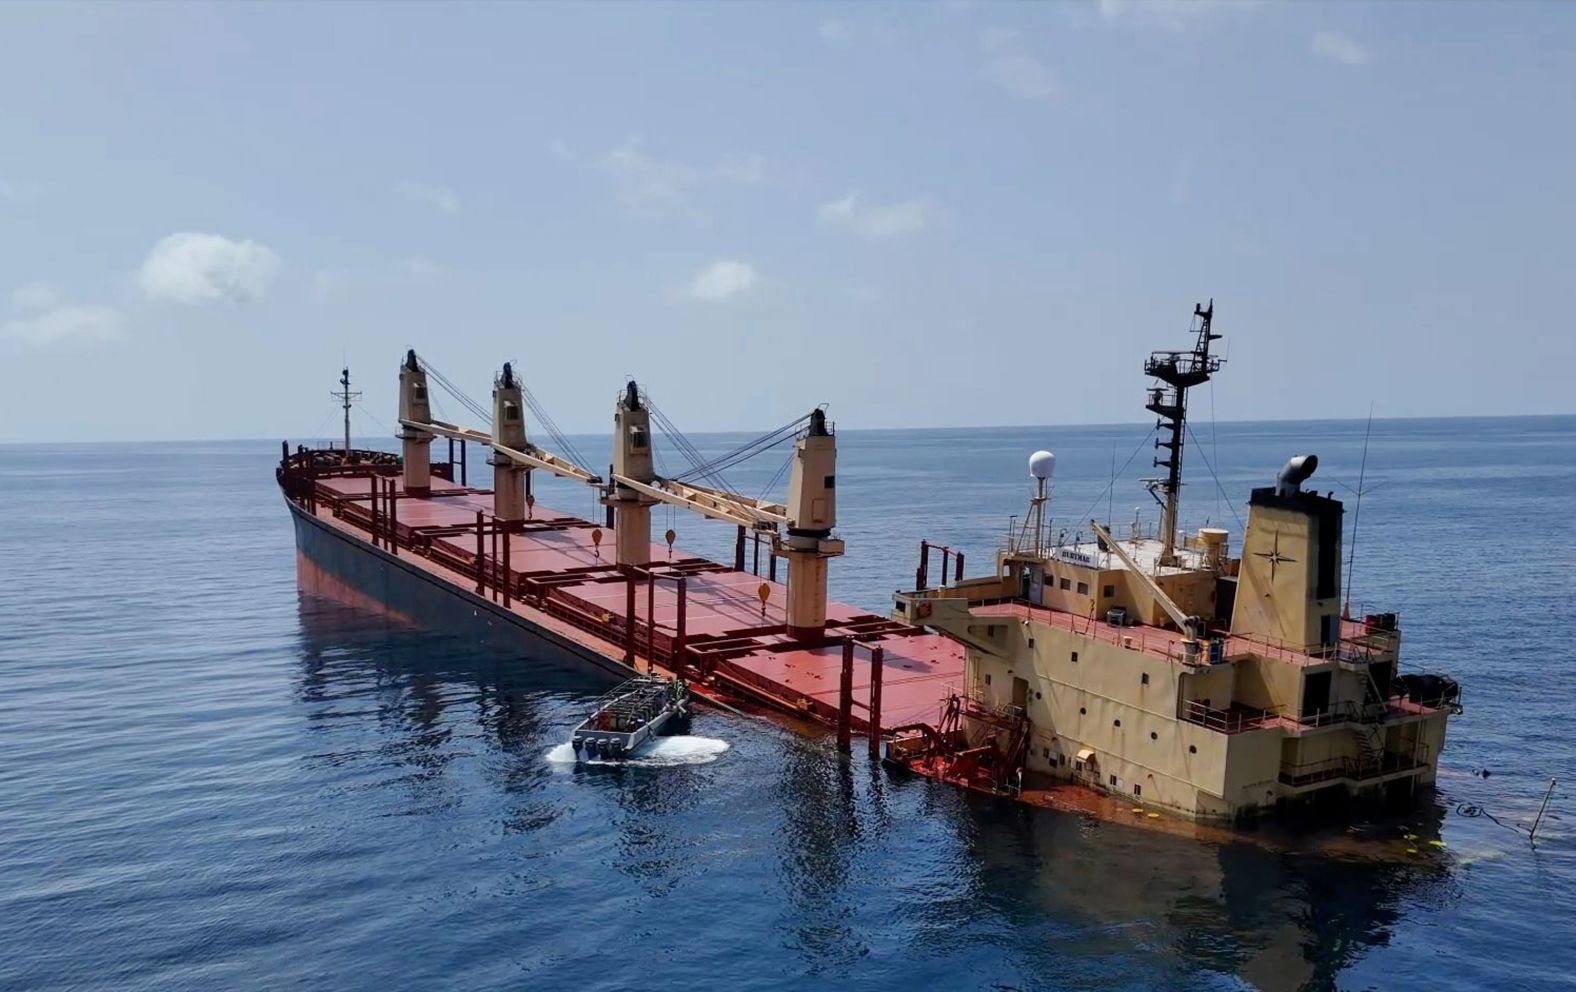 The M/V Rubymar, a Belize-flagged, UK-registered, Lebanese-owned cargo ship that was struck last month by ballistic missiles fired from Houthi territory in Yemen, sinks in the Red Sea on Sunday, March 3. <a href="index.php?page=&url=https%3A%2F%2Fwww.cnn.com%2F2024%2F02%2F23%2Fpolitics%2Fsinking-ship-houthi-missile-oil-slick%2Findex.html" target="_blank">The damage sustained by the Rubymar</a> is potentially the most significant to a vessel caused by an attack launched by the Houthis, who have been targeting commercial shipping in the Red Sea and Gulf of Aden for months.